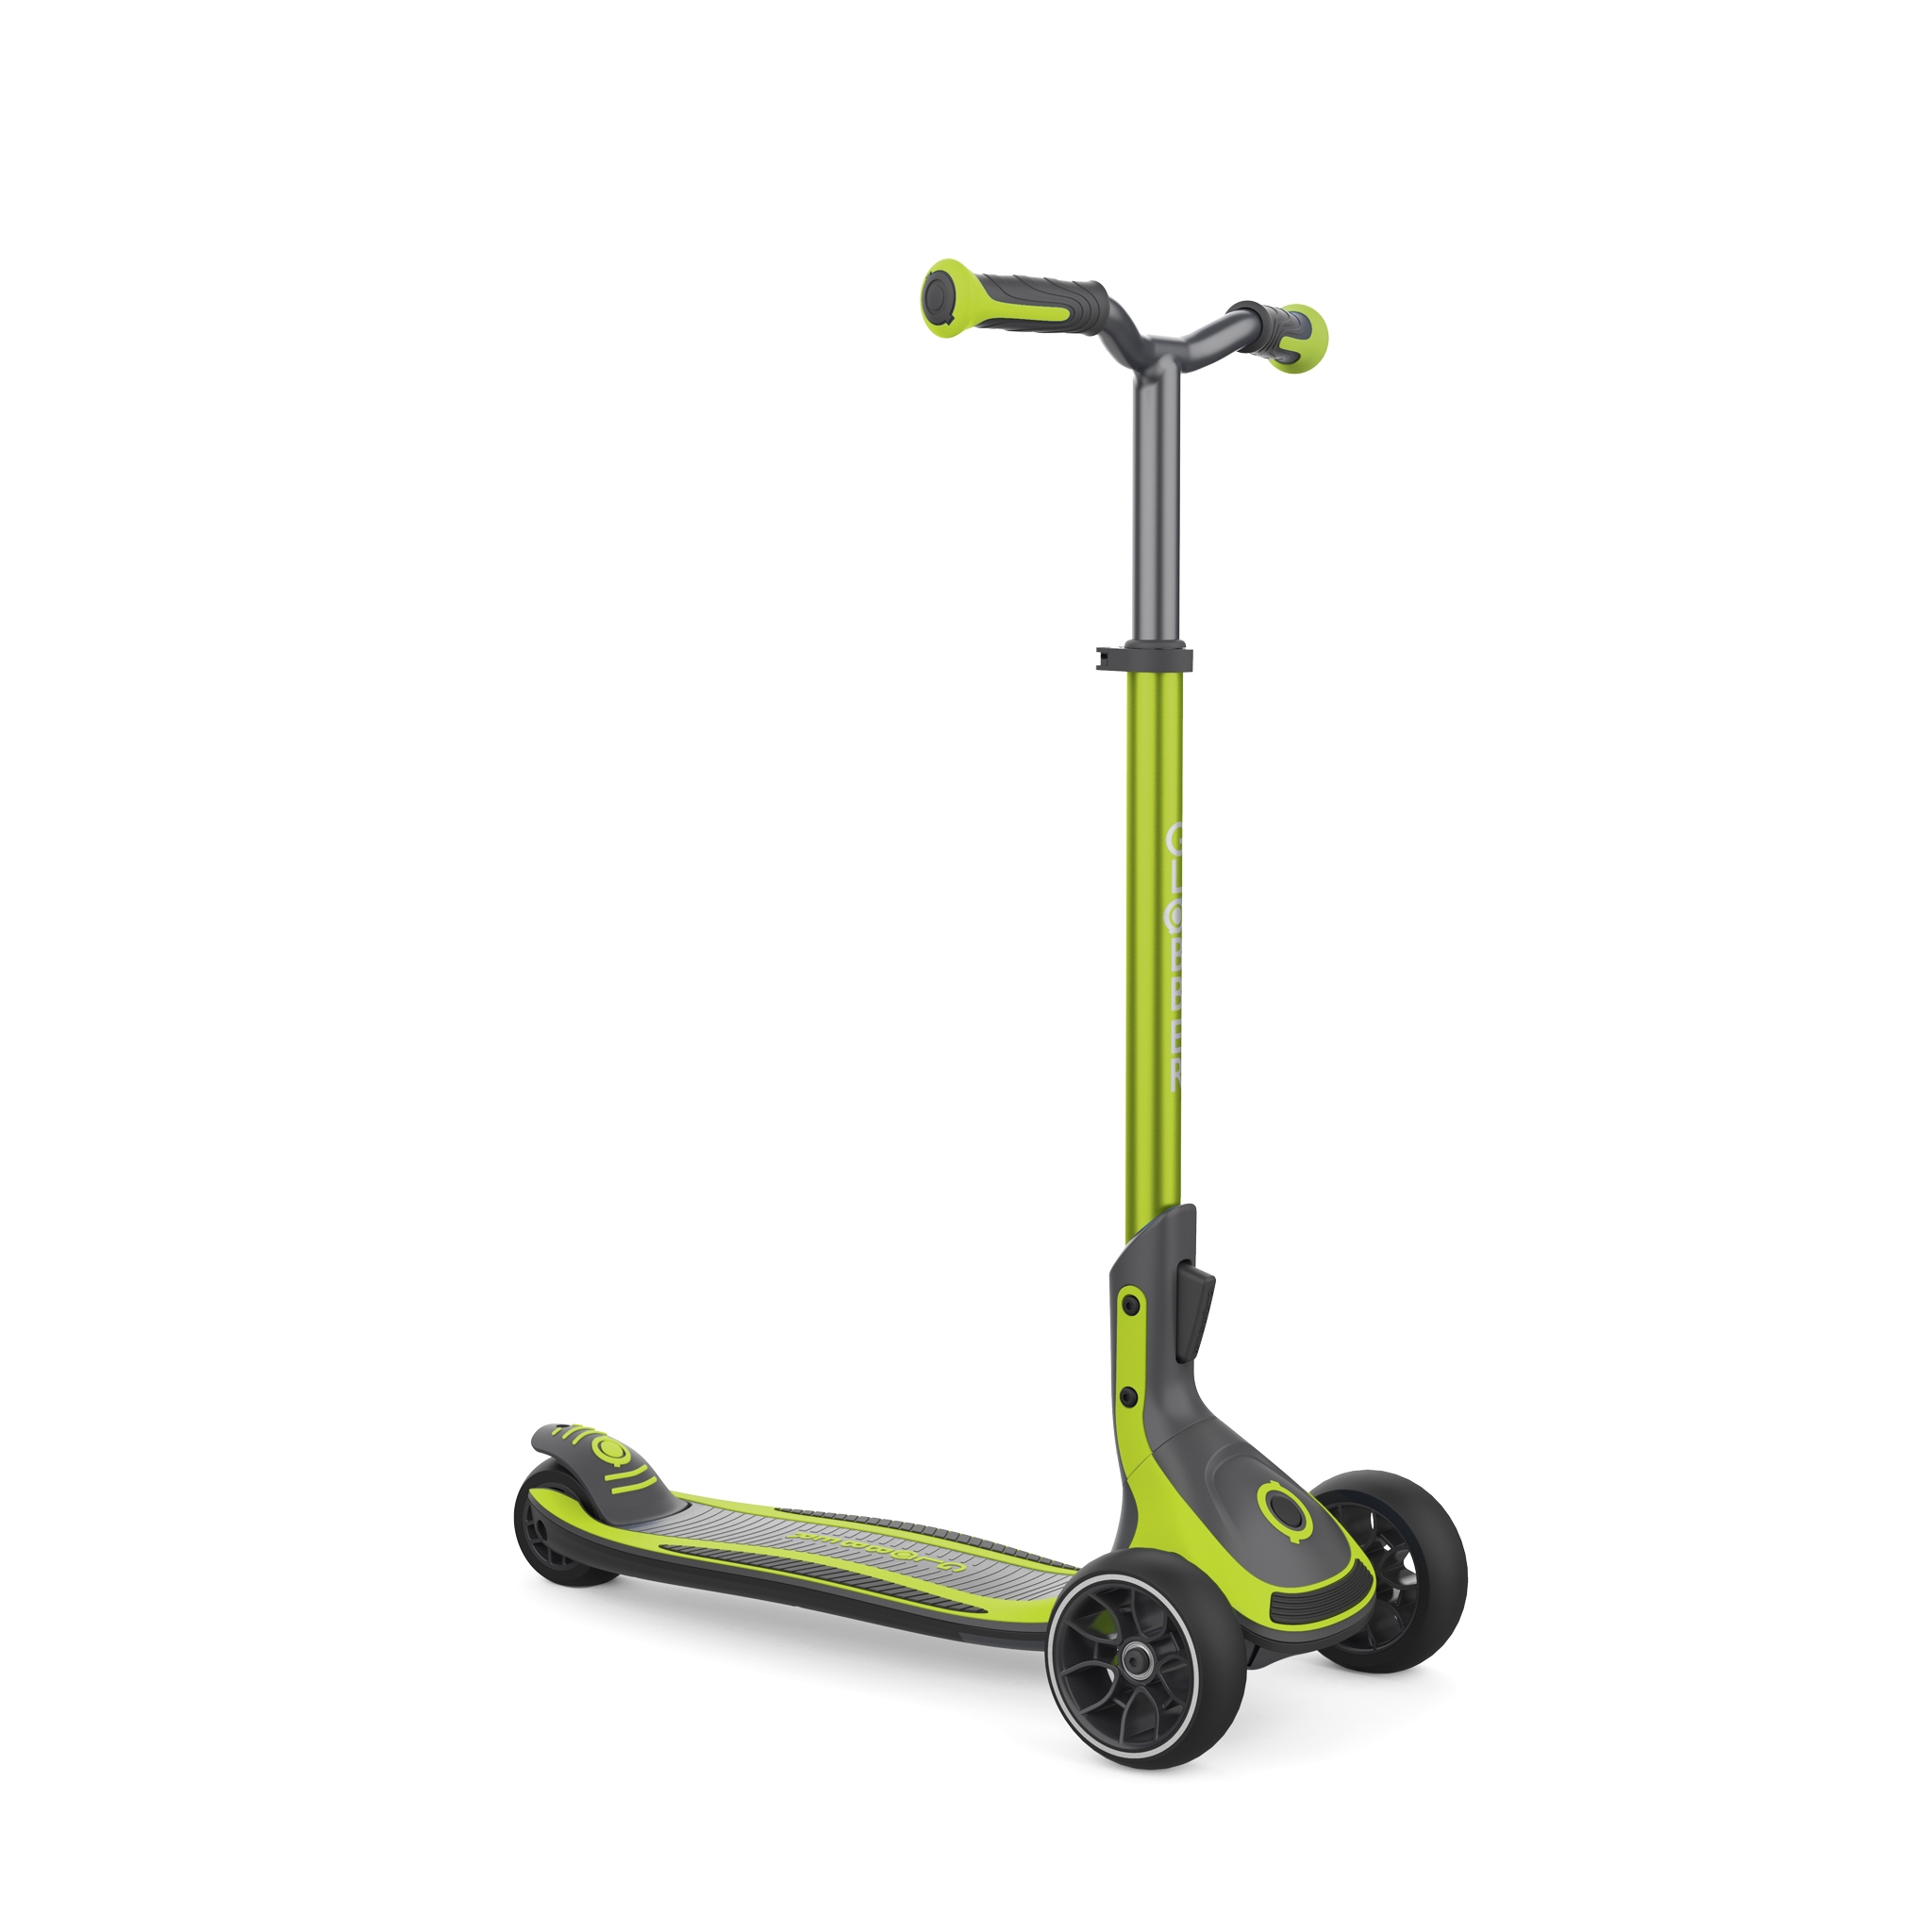 3 wheel foldable scooter for kids, teens and adults - Globber ULTIMUM 0